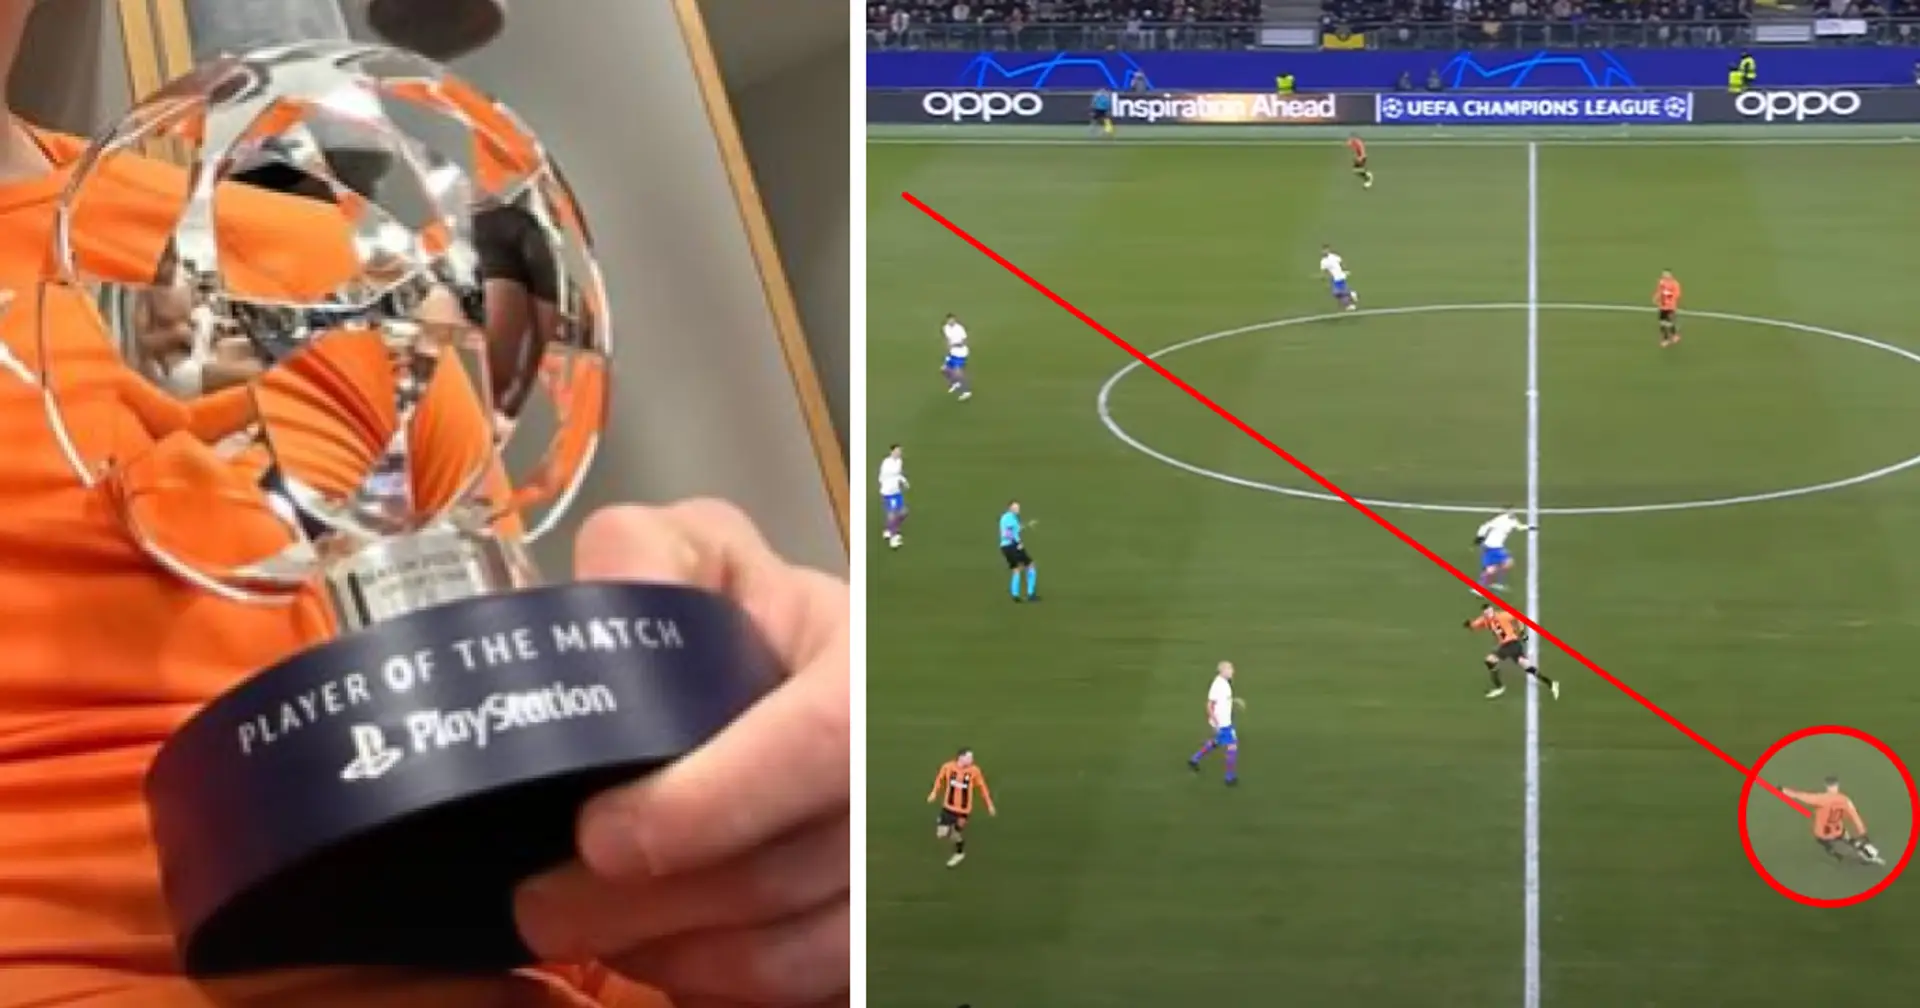 'That pass is Guti'esque': Global fans impressed with Shakhtar Donetsk player after Barcelona game